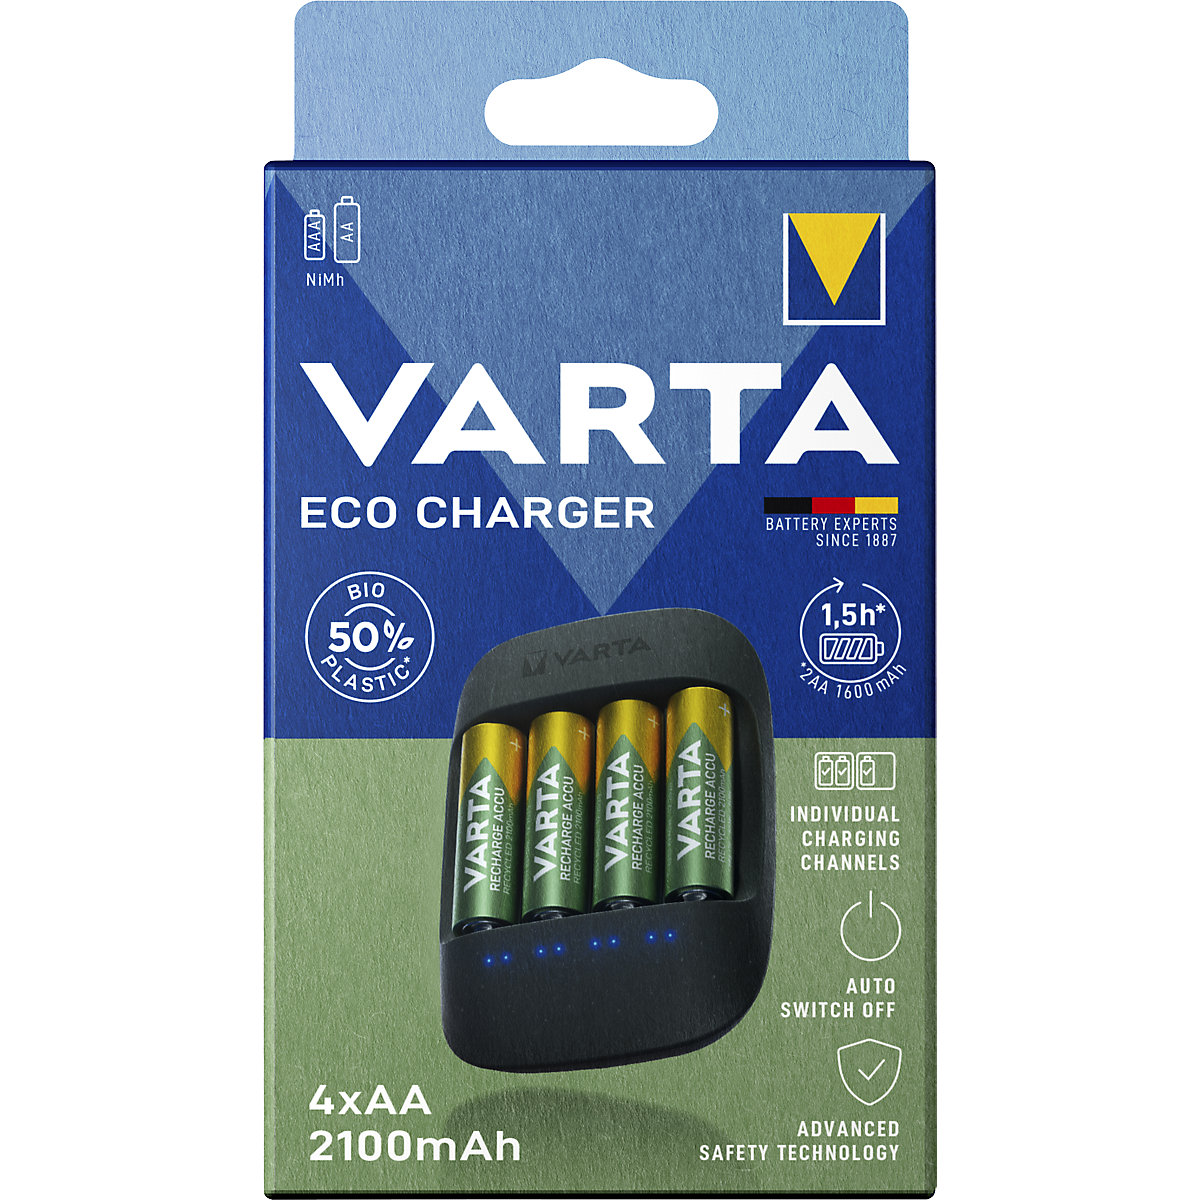 Chargeur ECO CHARGER – VARTA